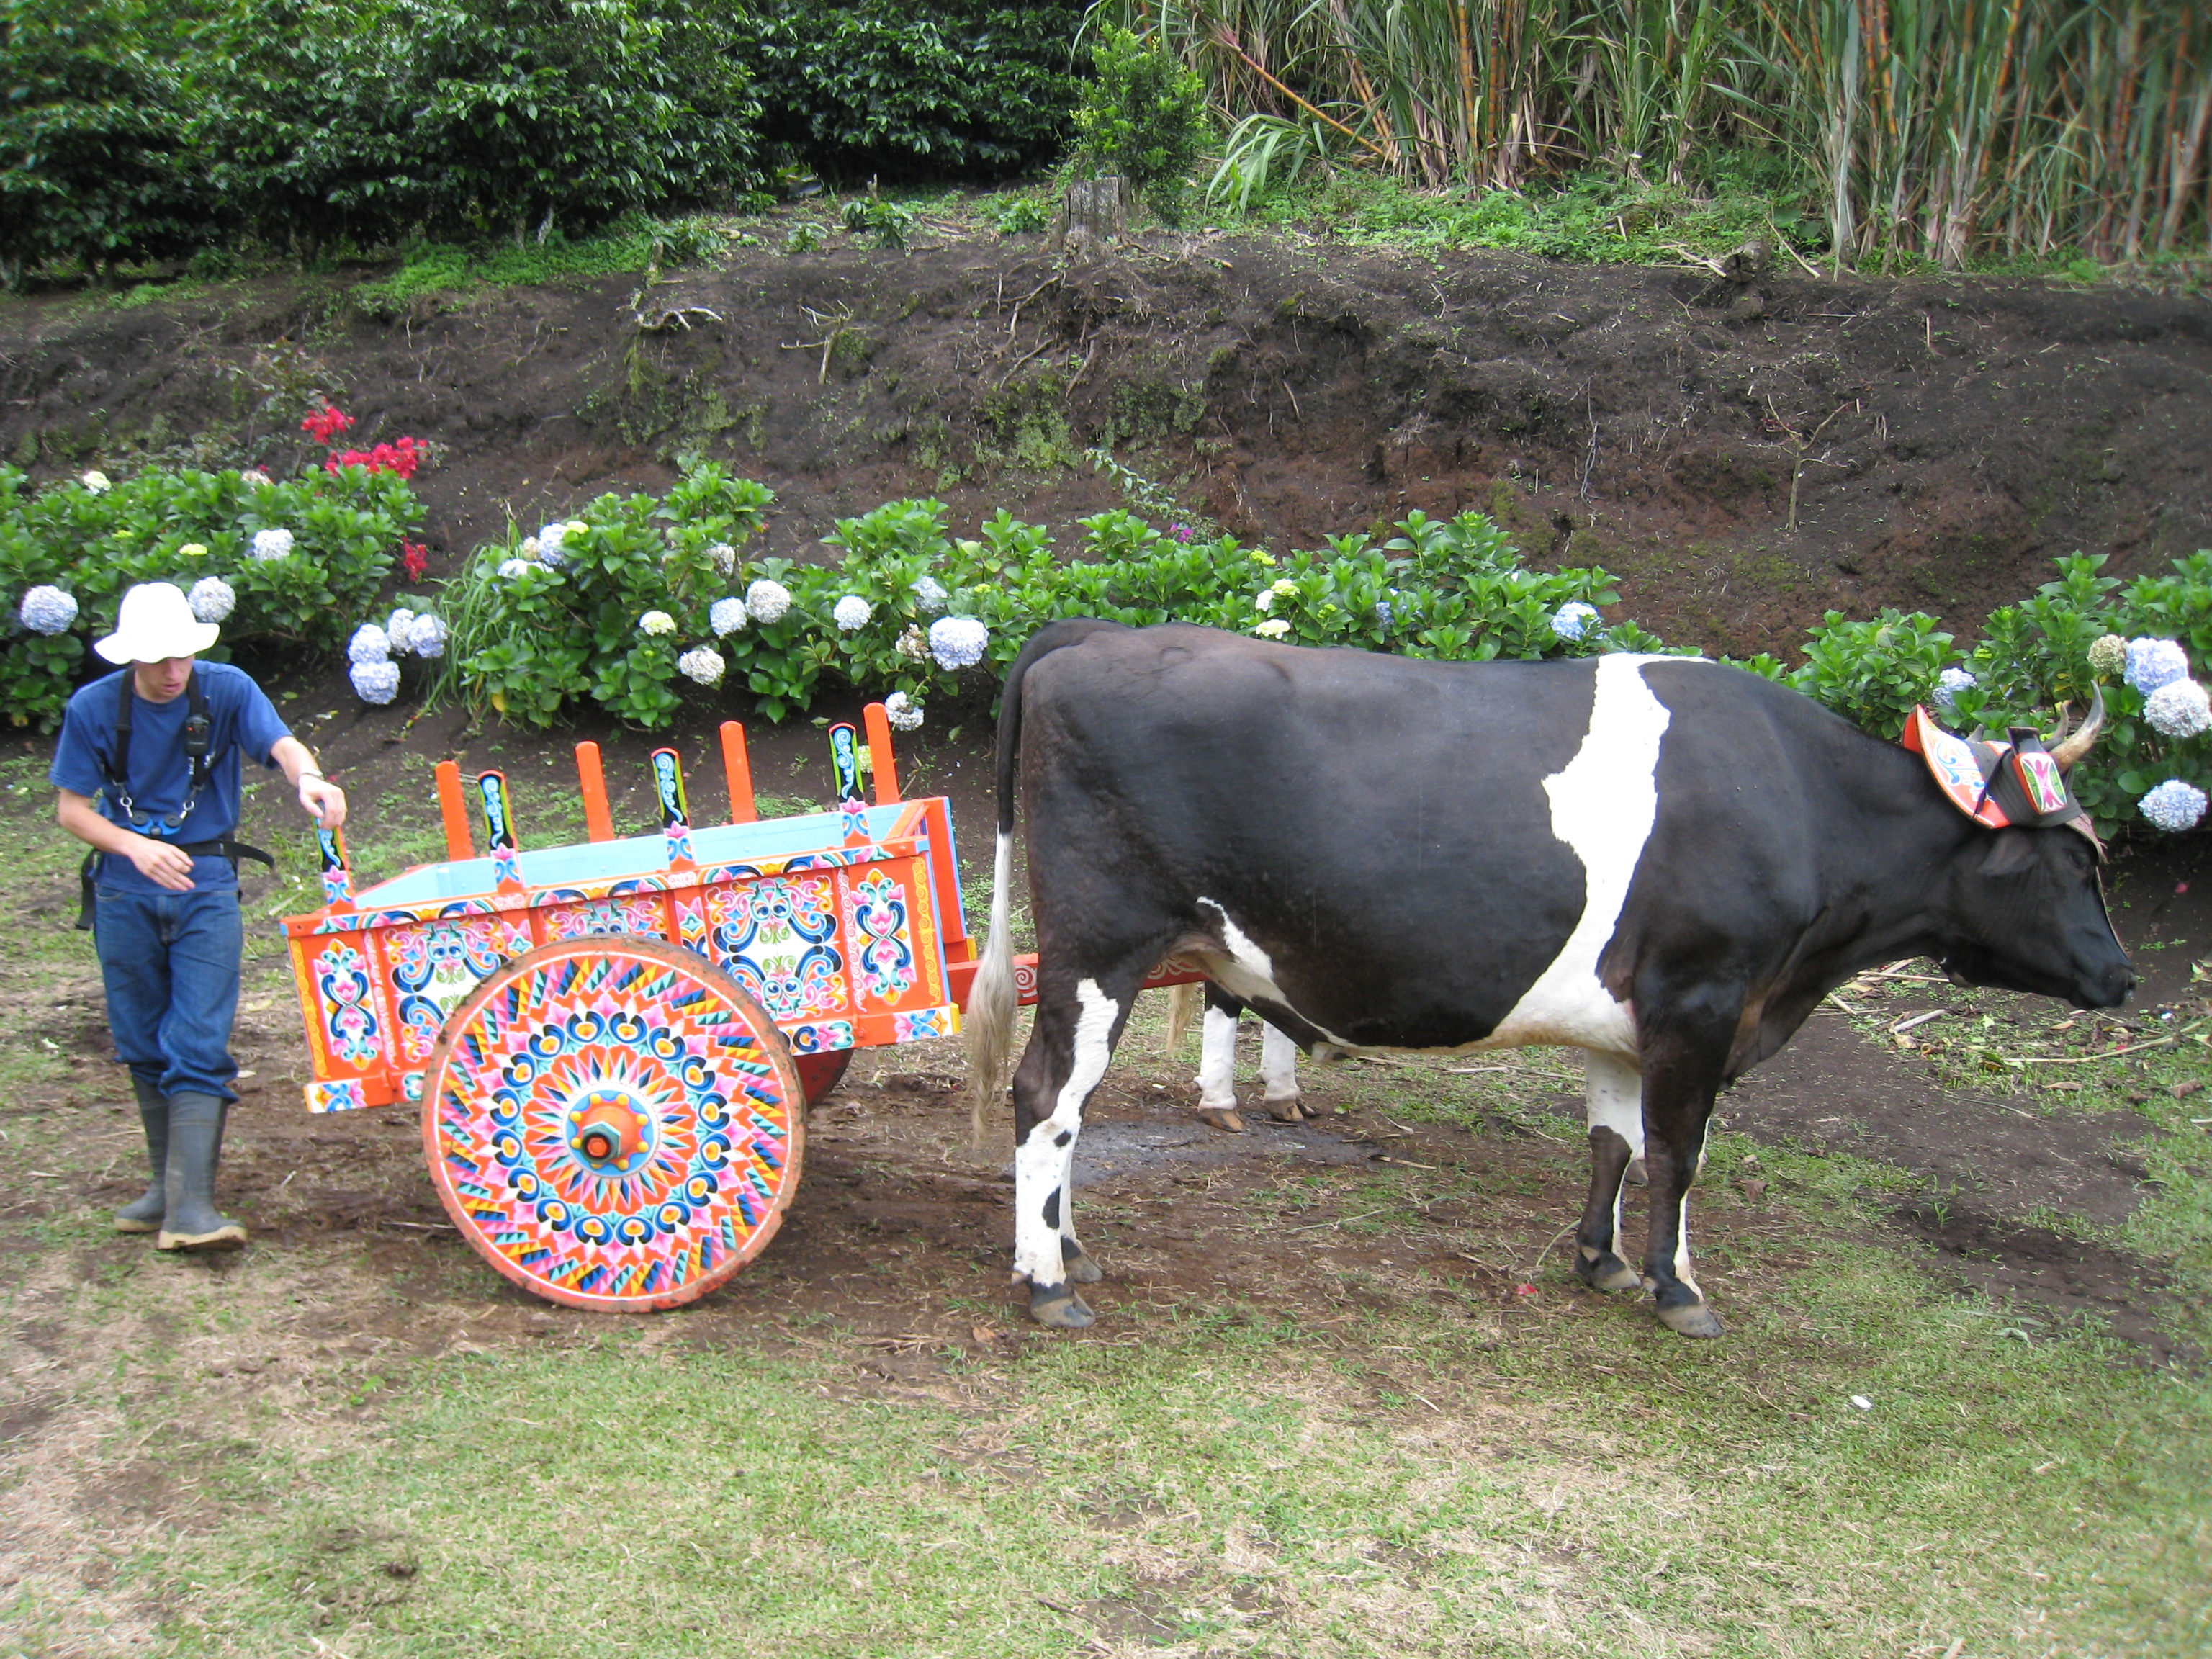 File:The cow pushing the decorated cart.jpg - Wikimedia Commons